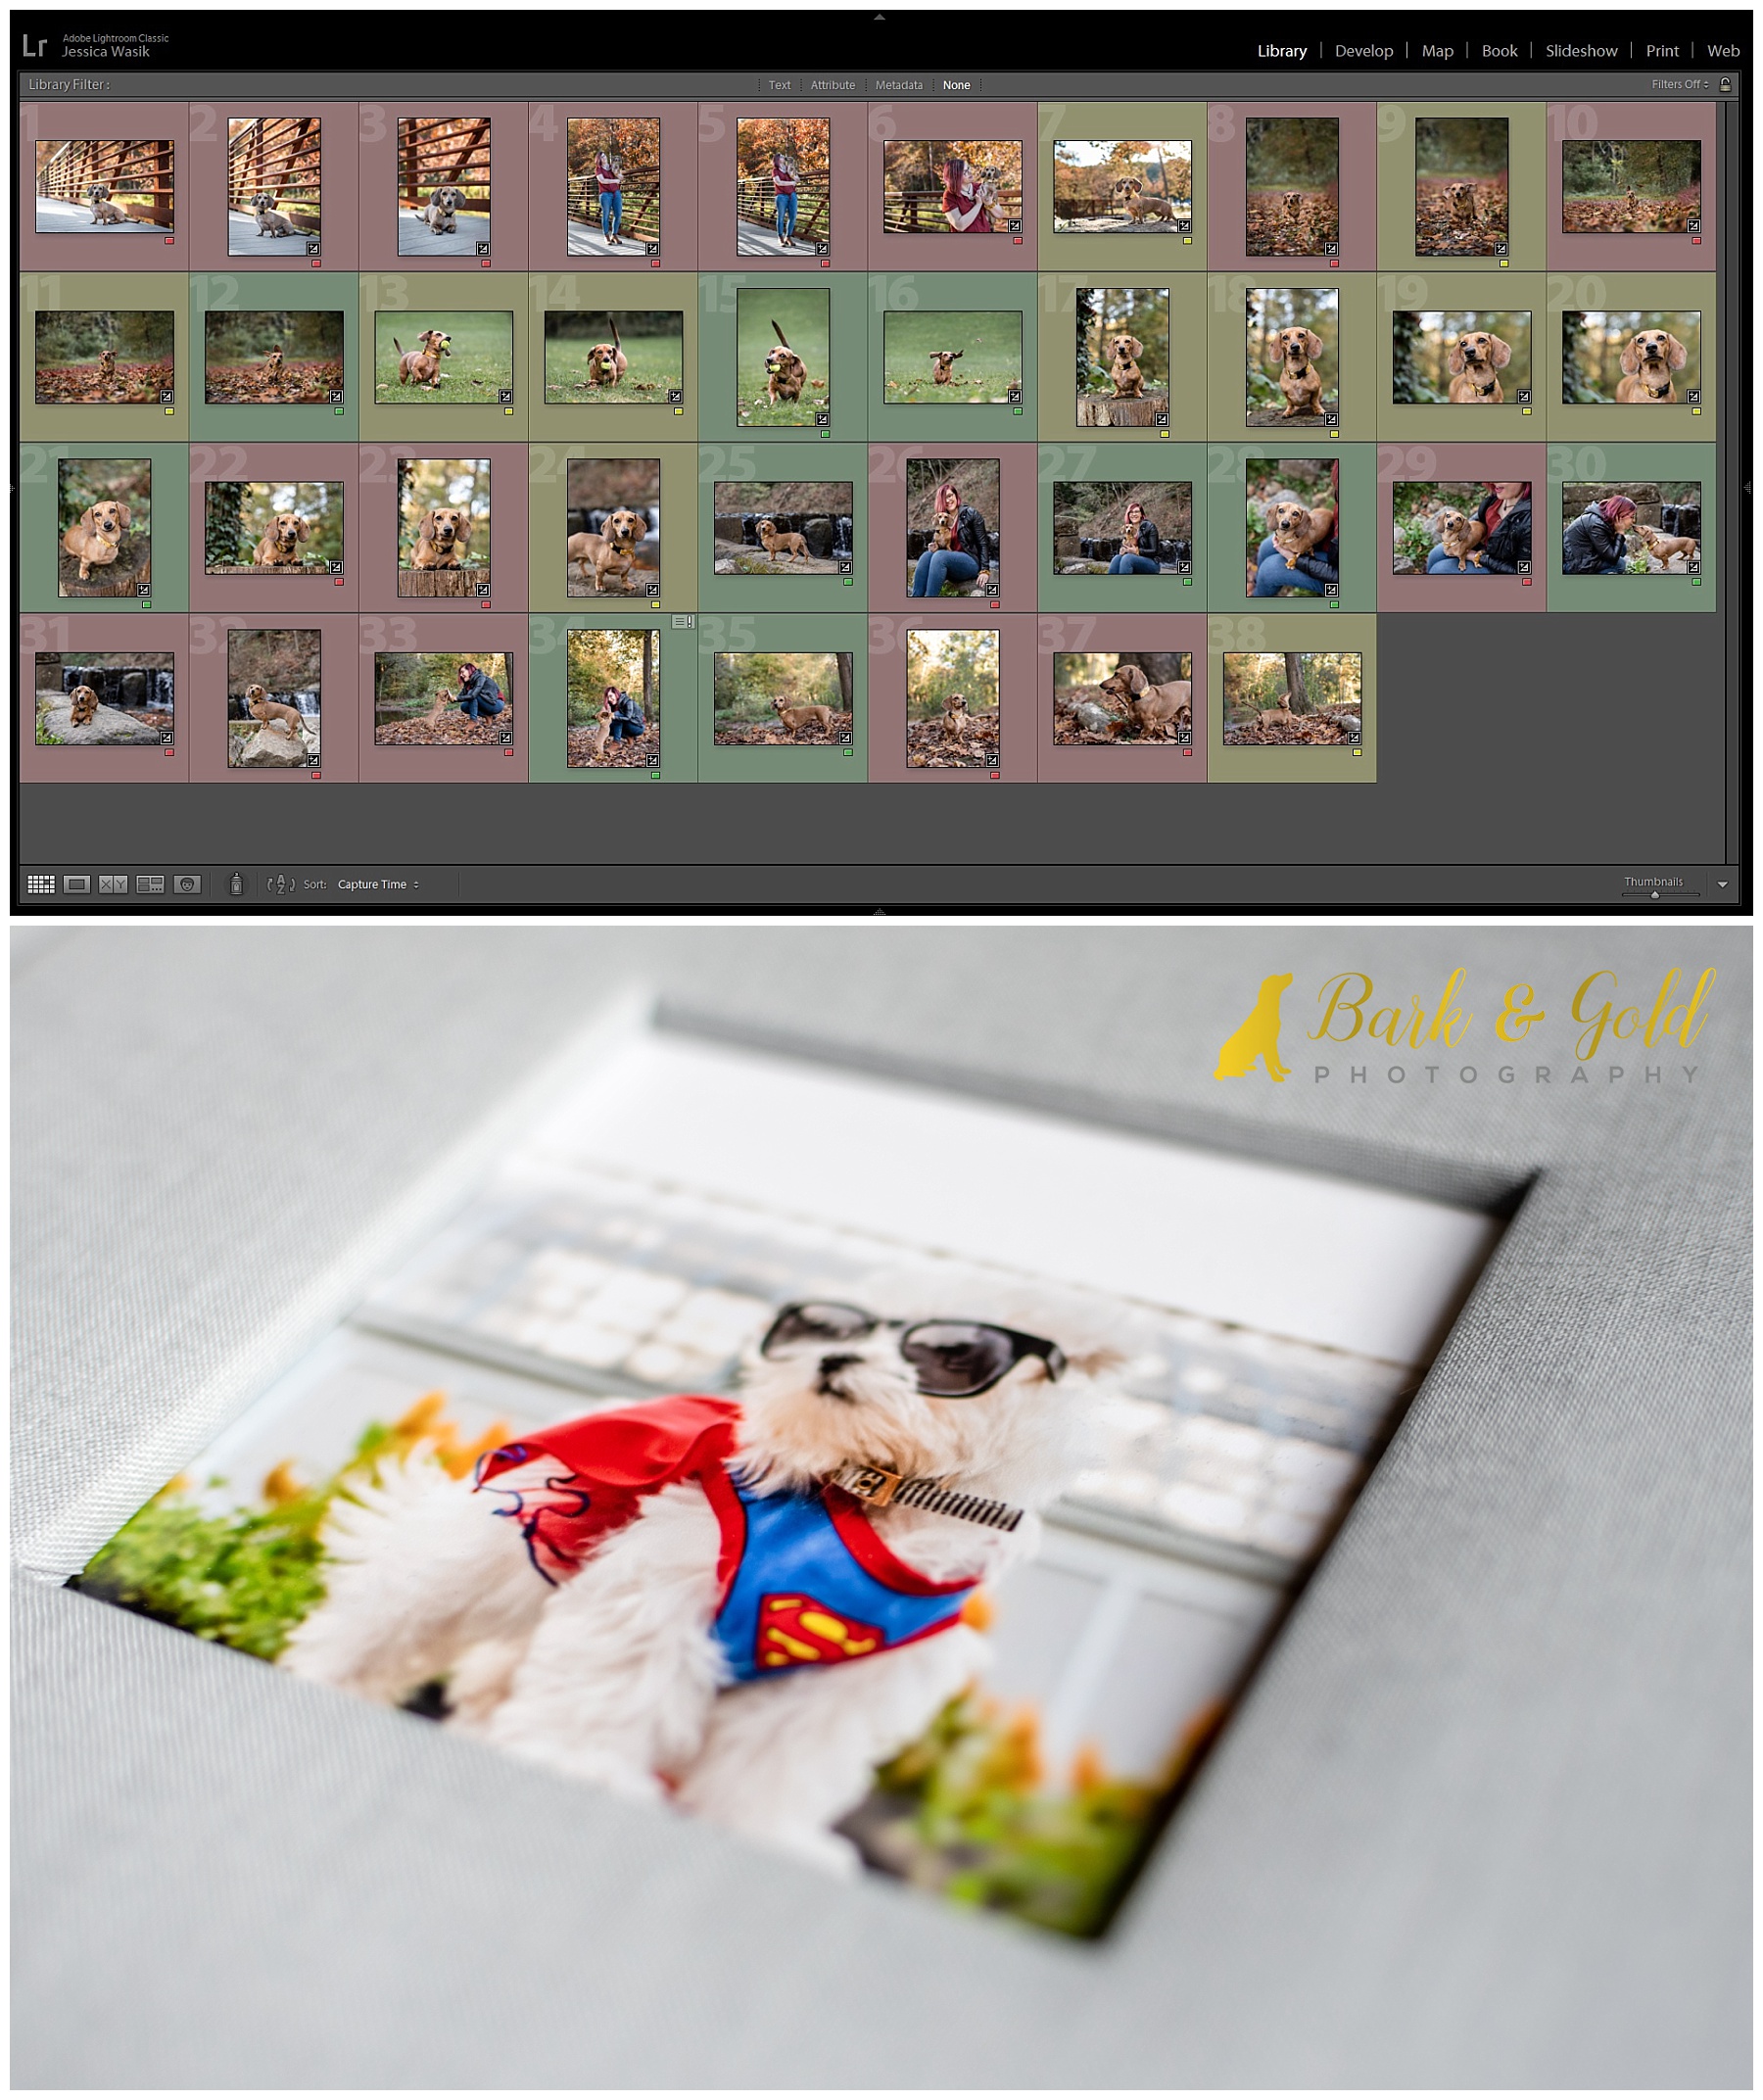 Lightroom gallery and product sample for a reveal and ordering appointment